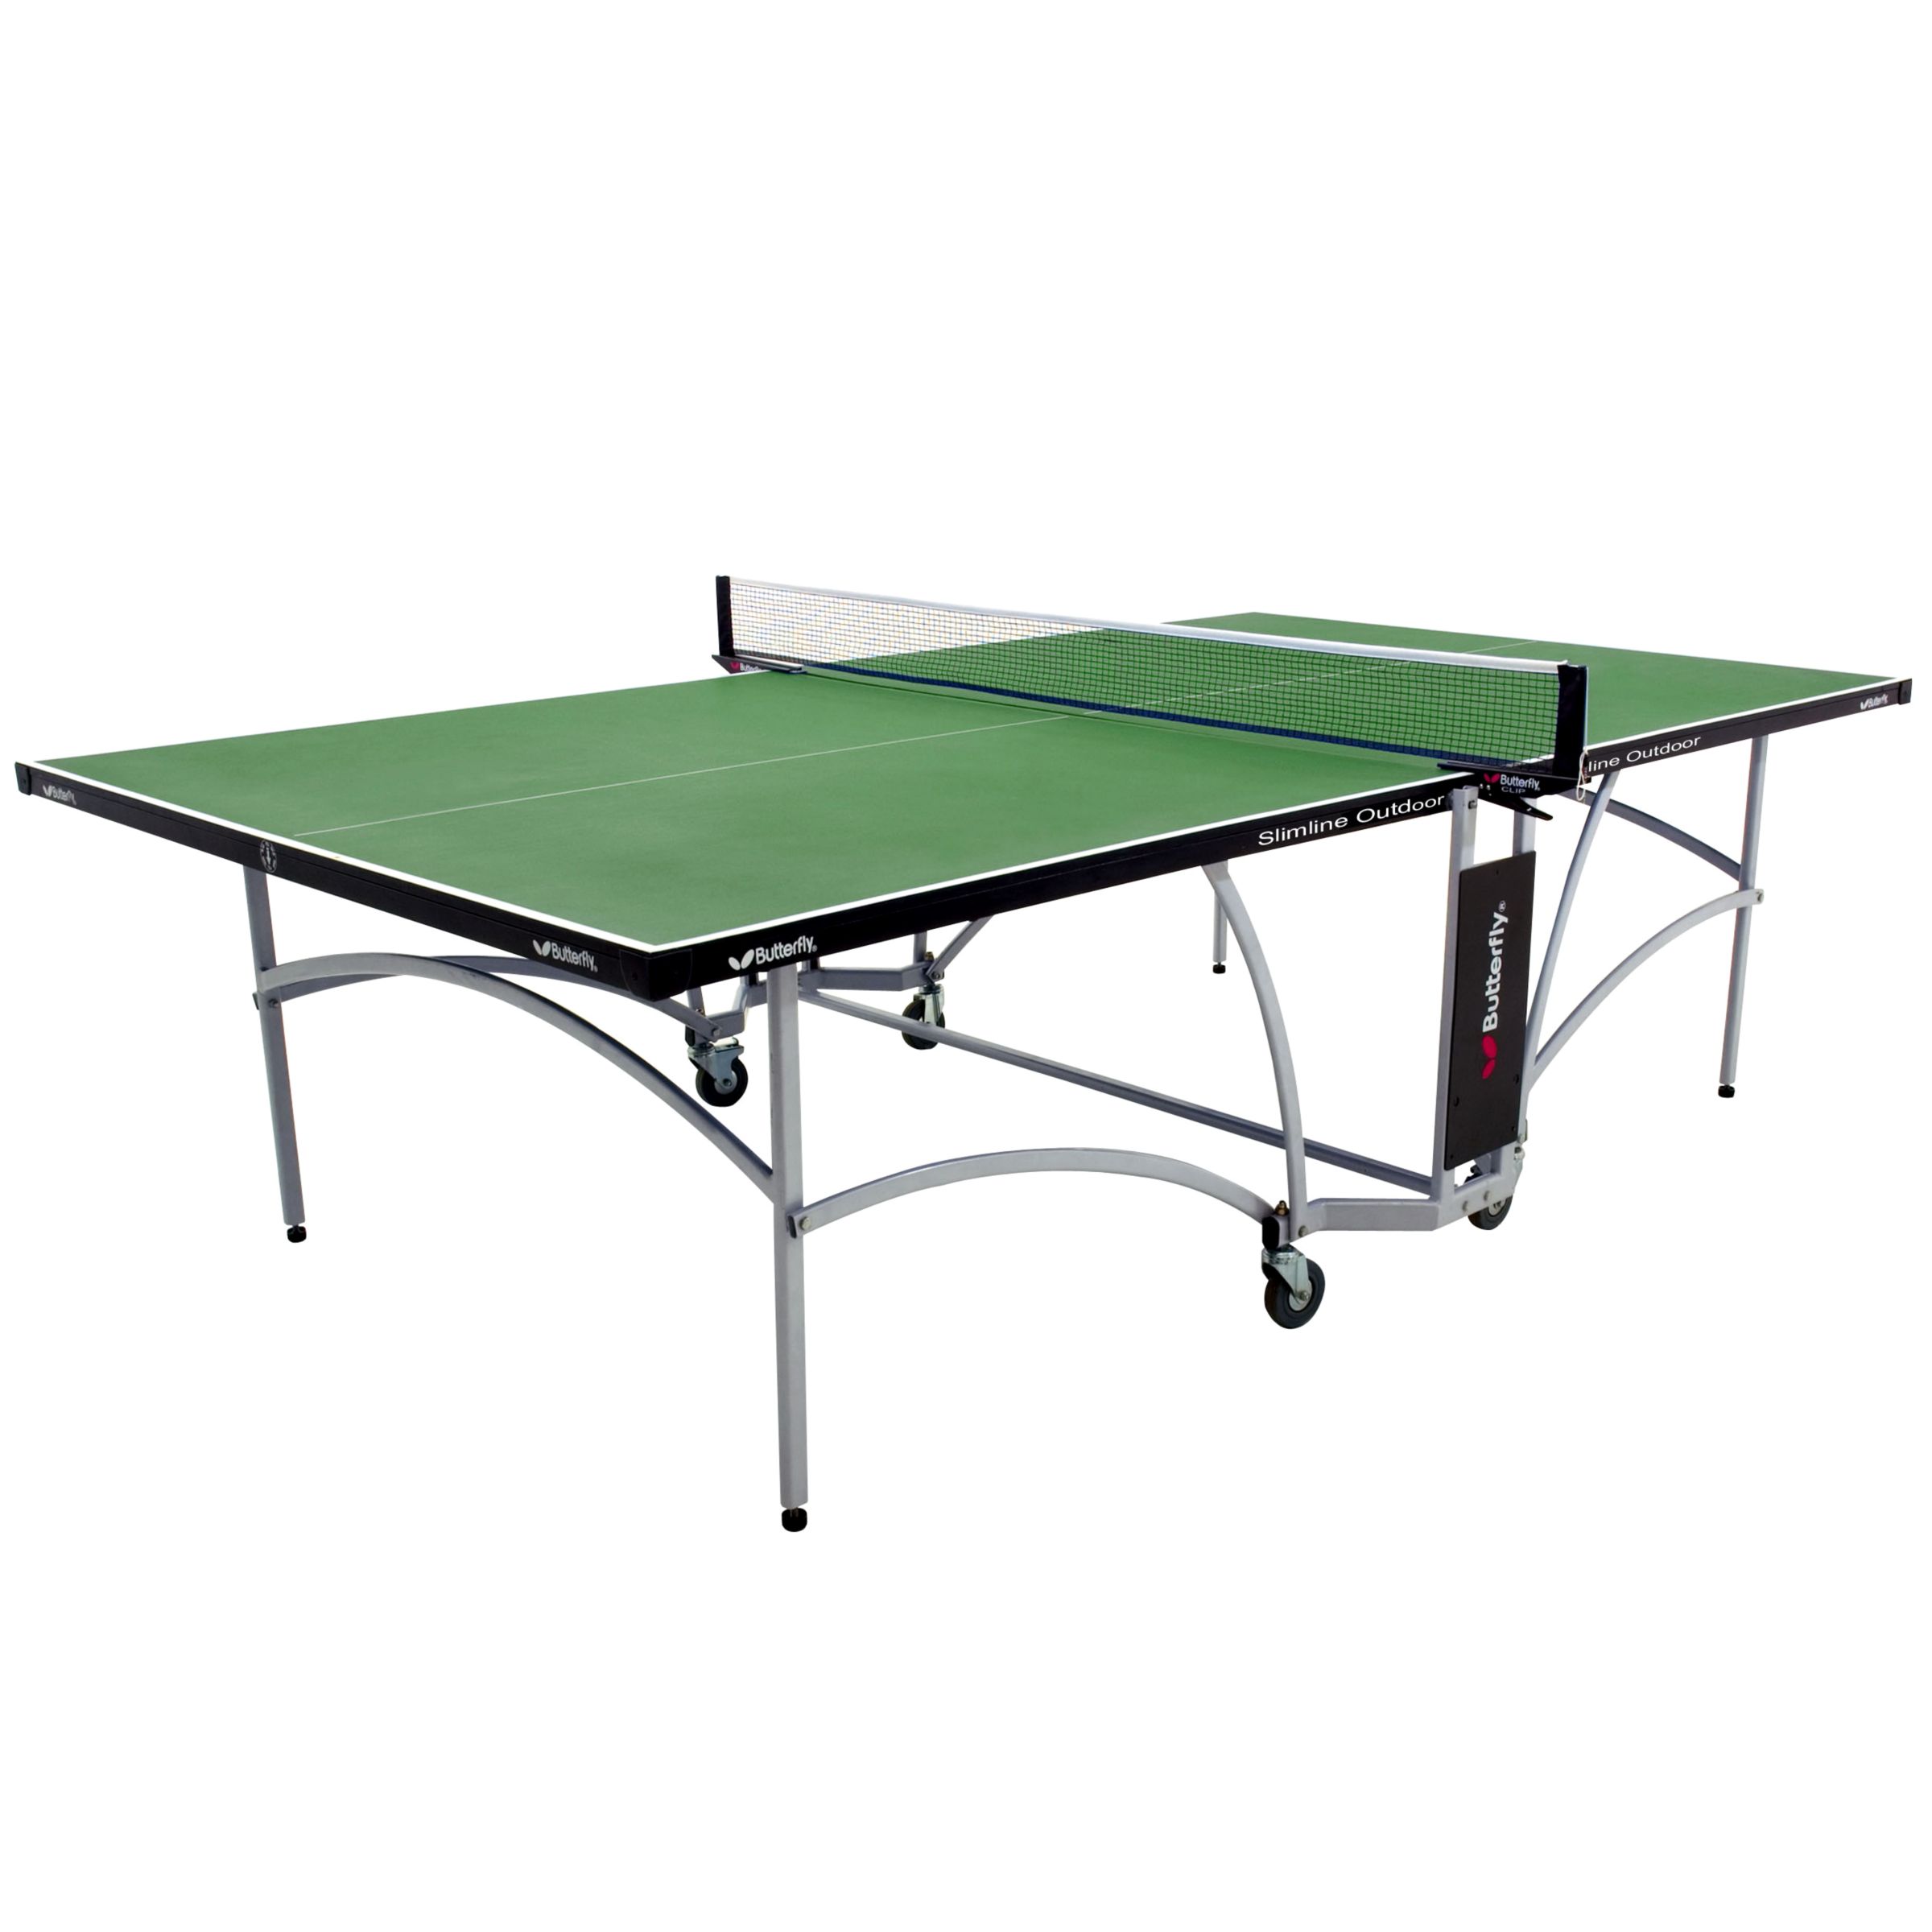 Butterfly Slimline Outdoor Table Tennis Table, Green at John Lewis